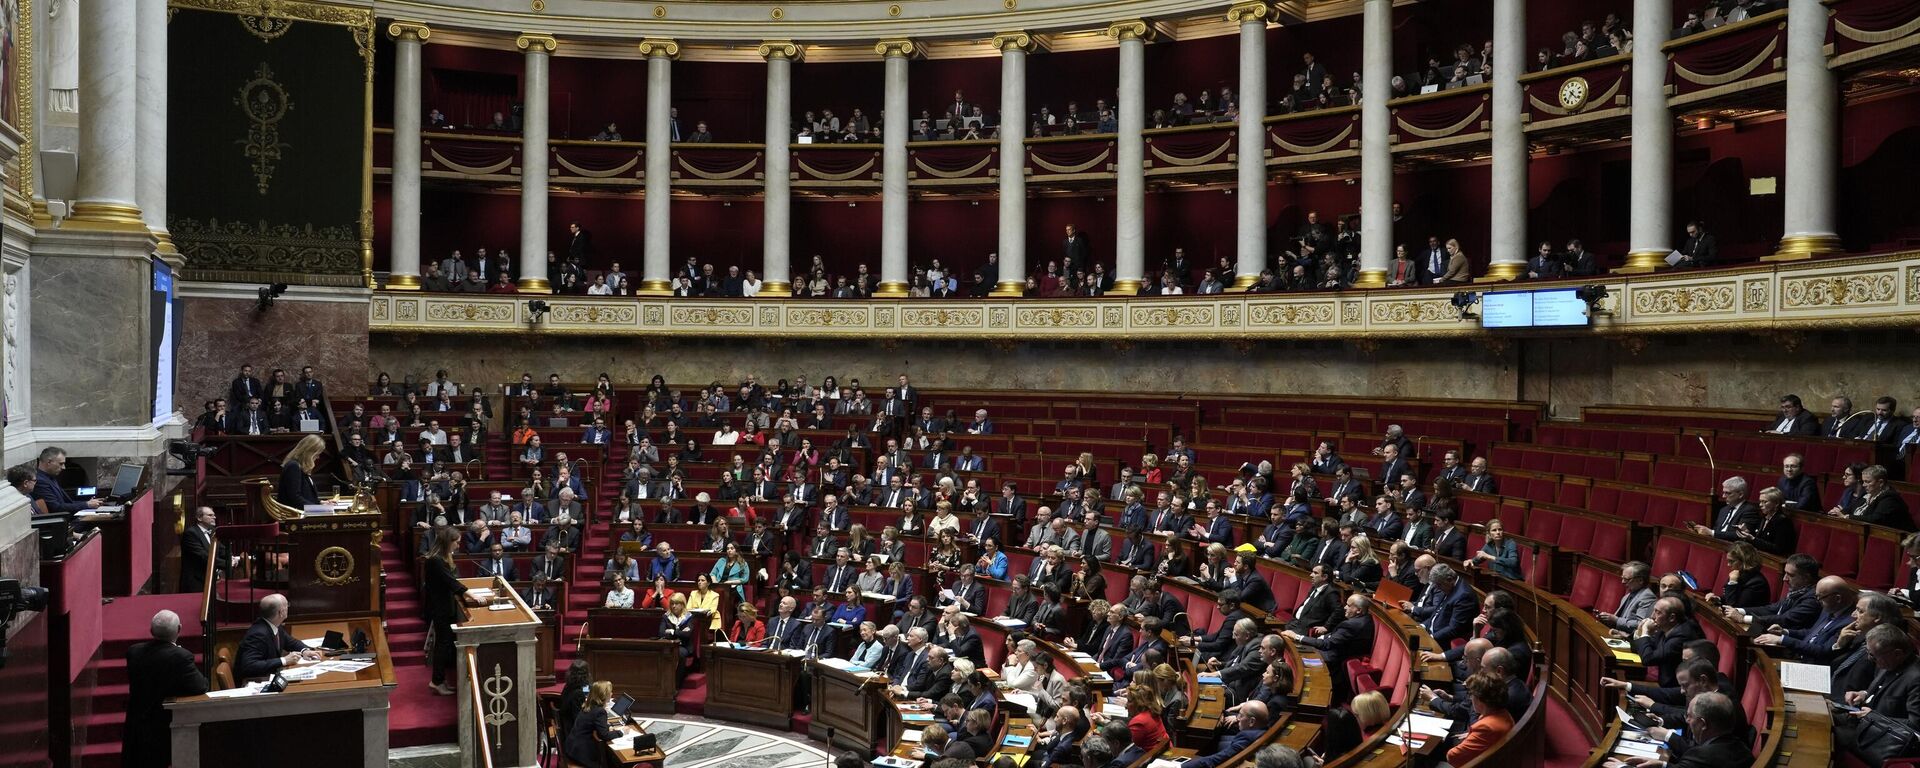 French lawmakers gather at the National Assembly in Paris, Monday, March 20, 2023. - Sputnik International, 1920, 20.03.2023